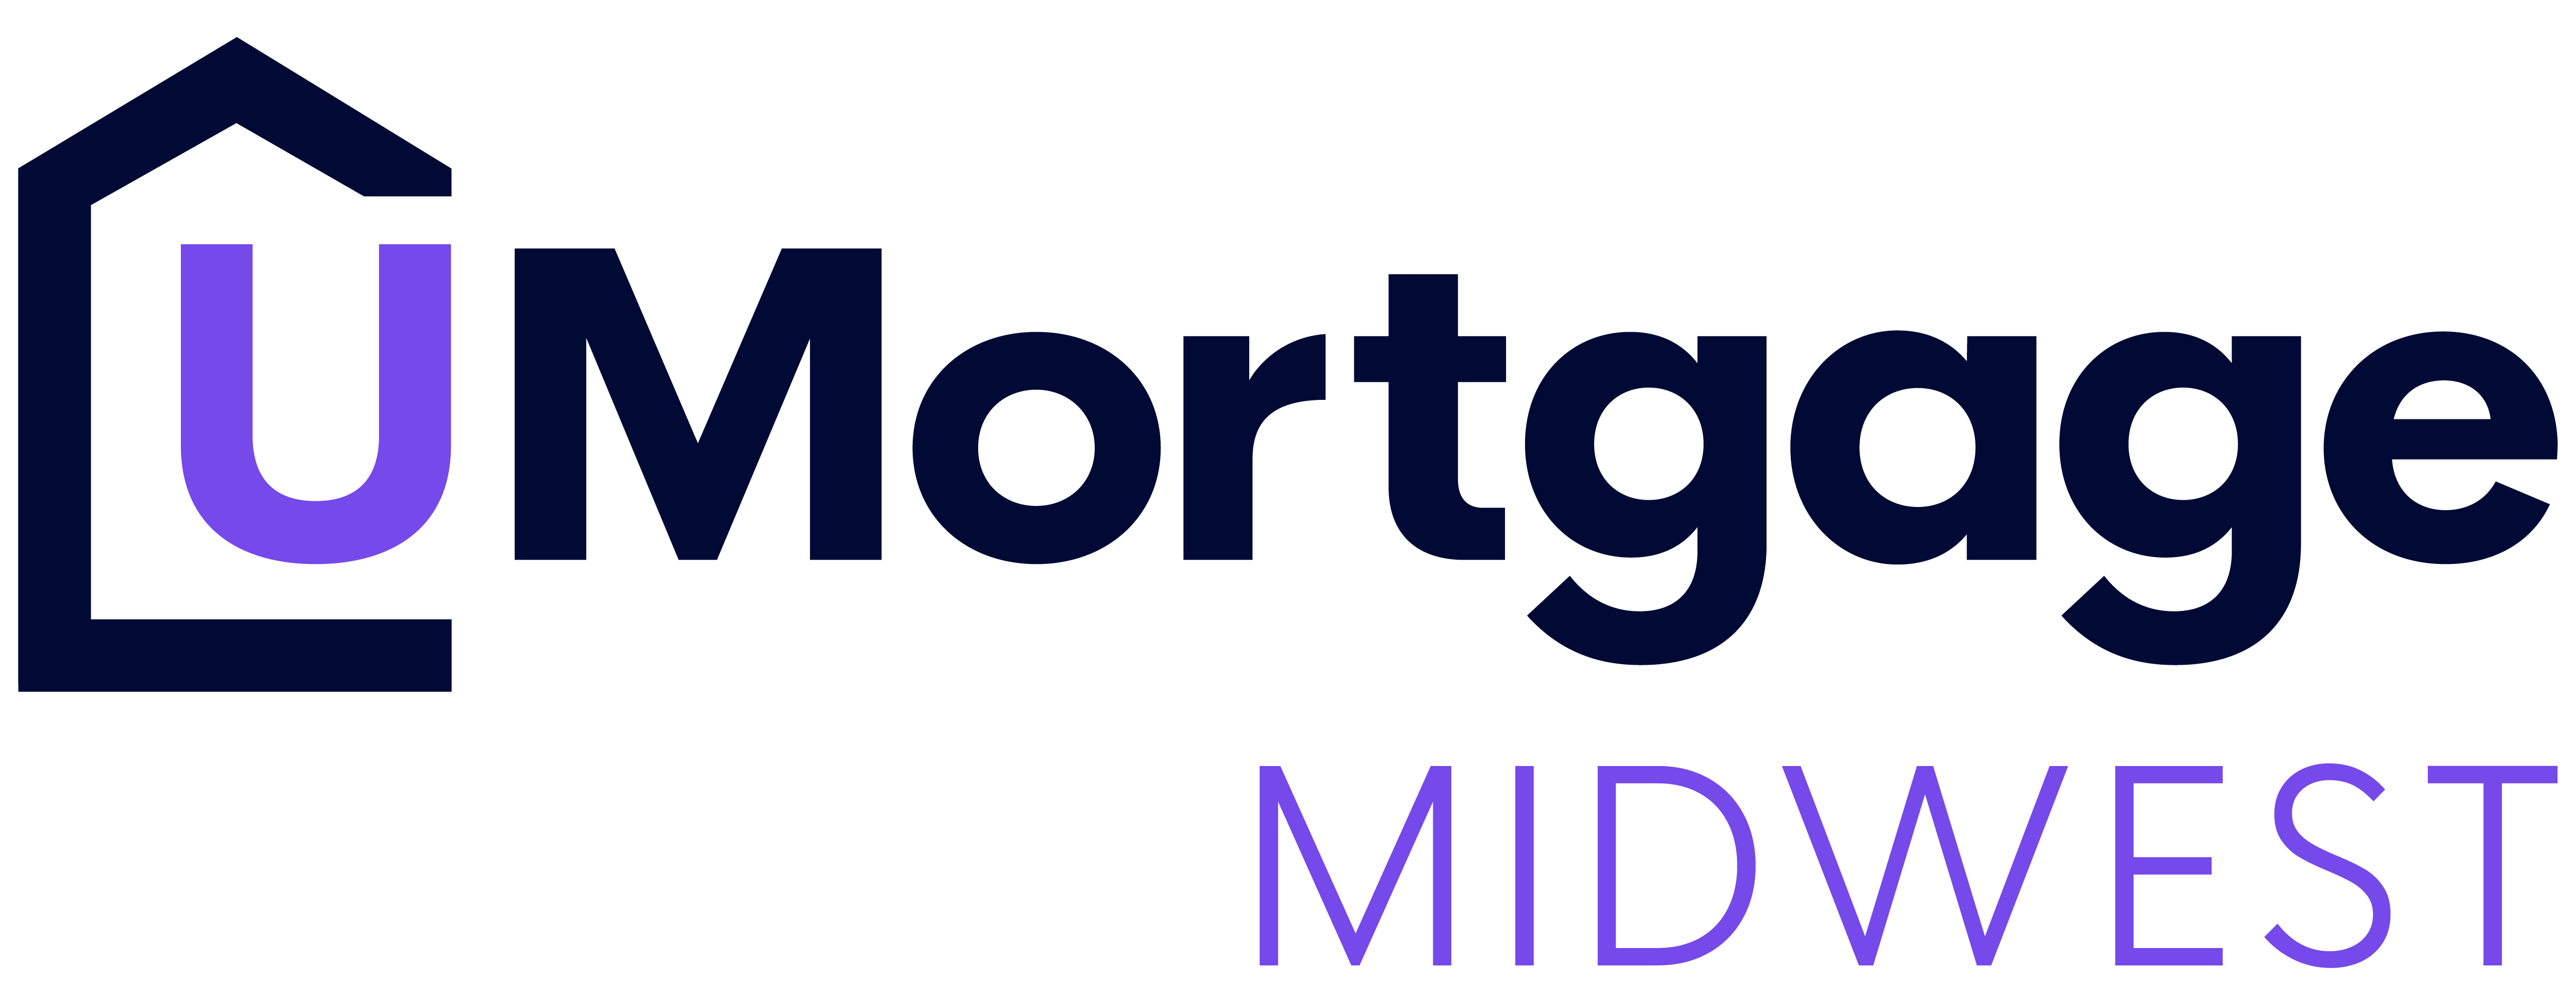 UMortgage Midwest